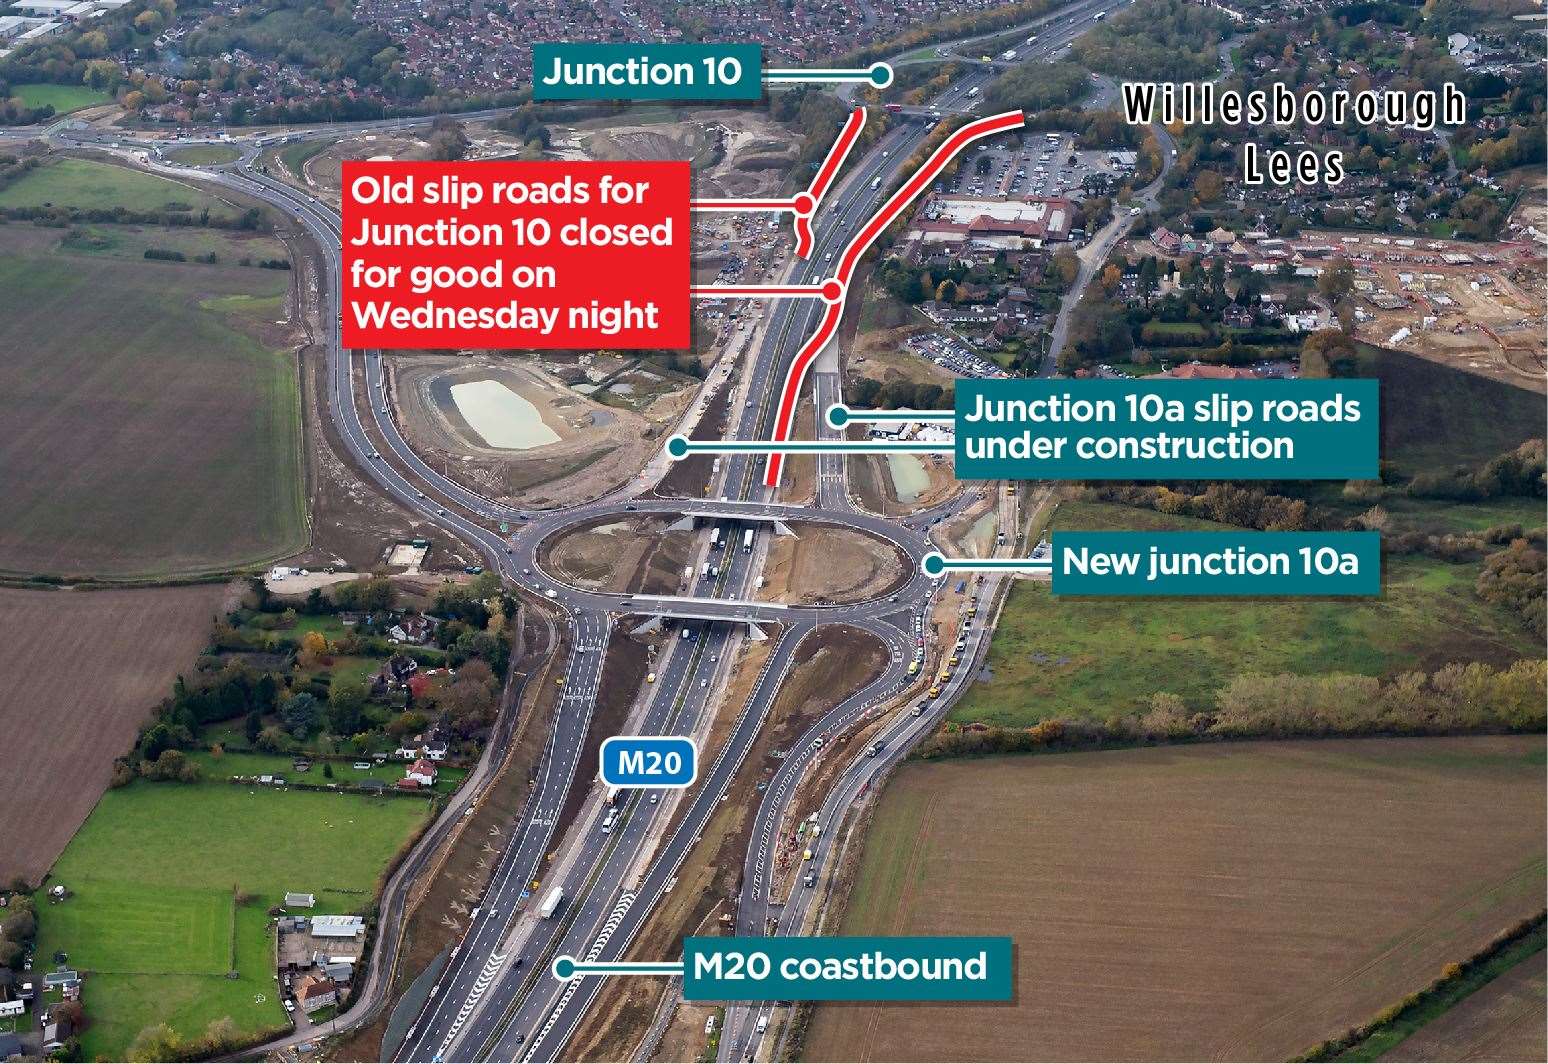 The new Junction 10a and Junction 10 layout